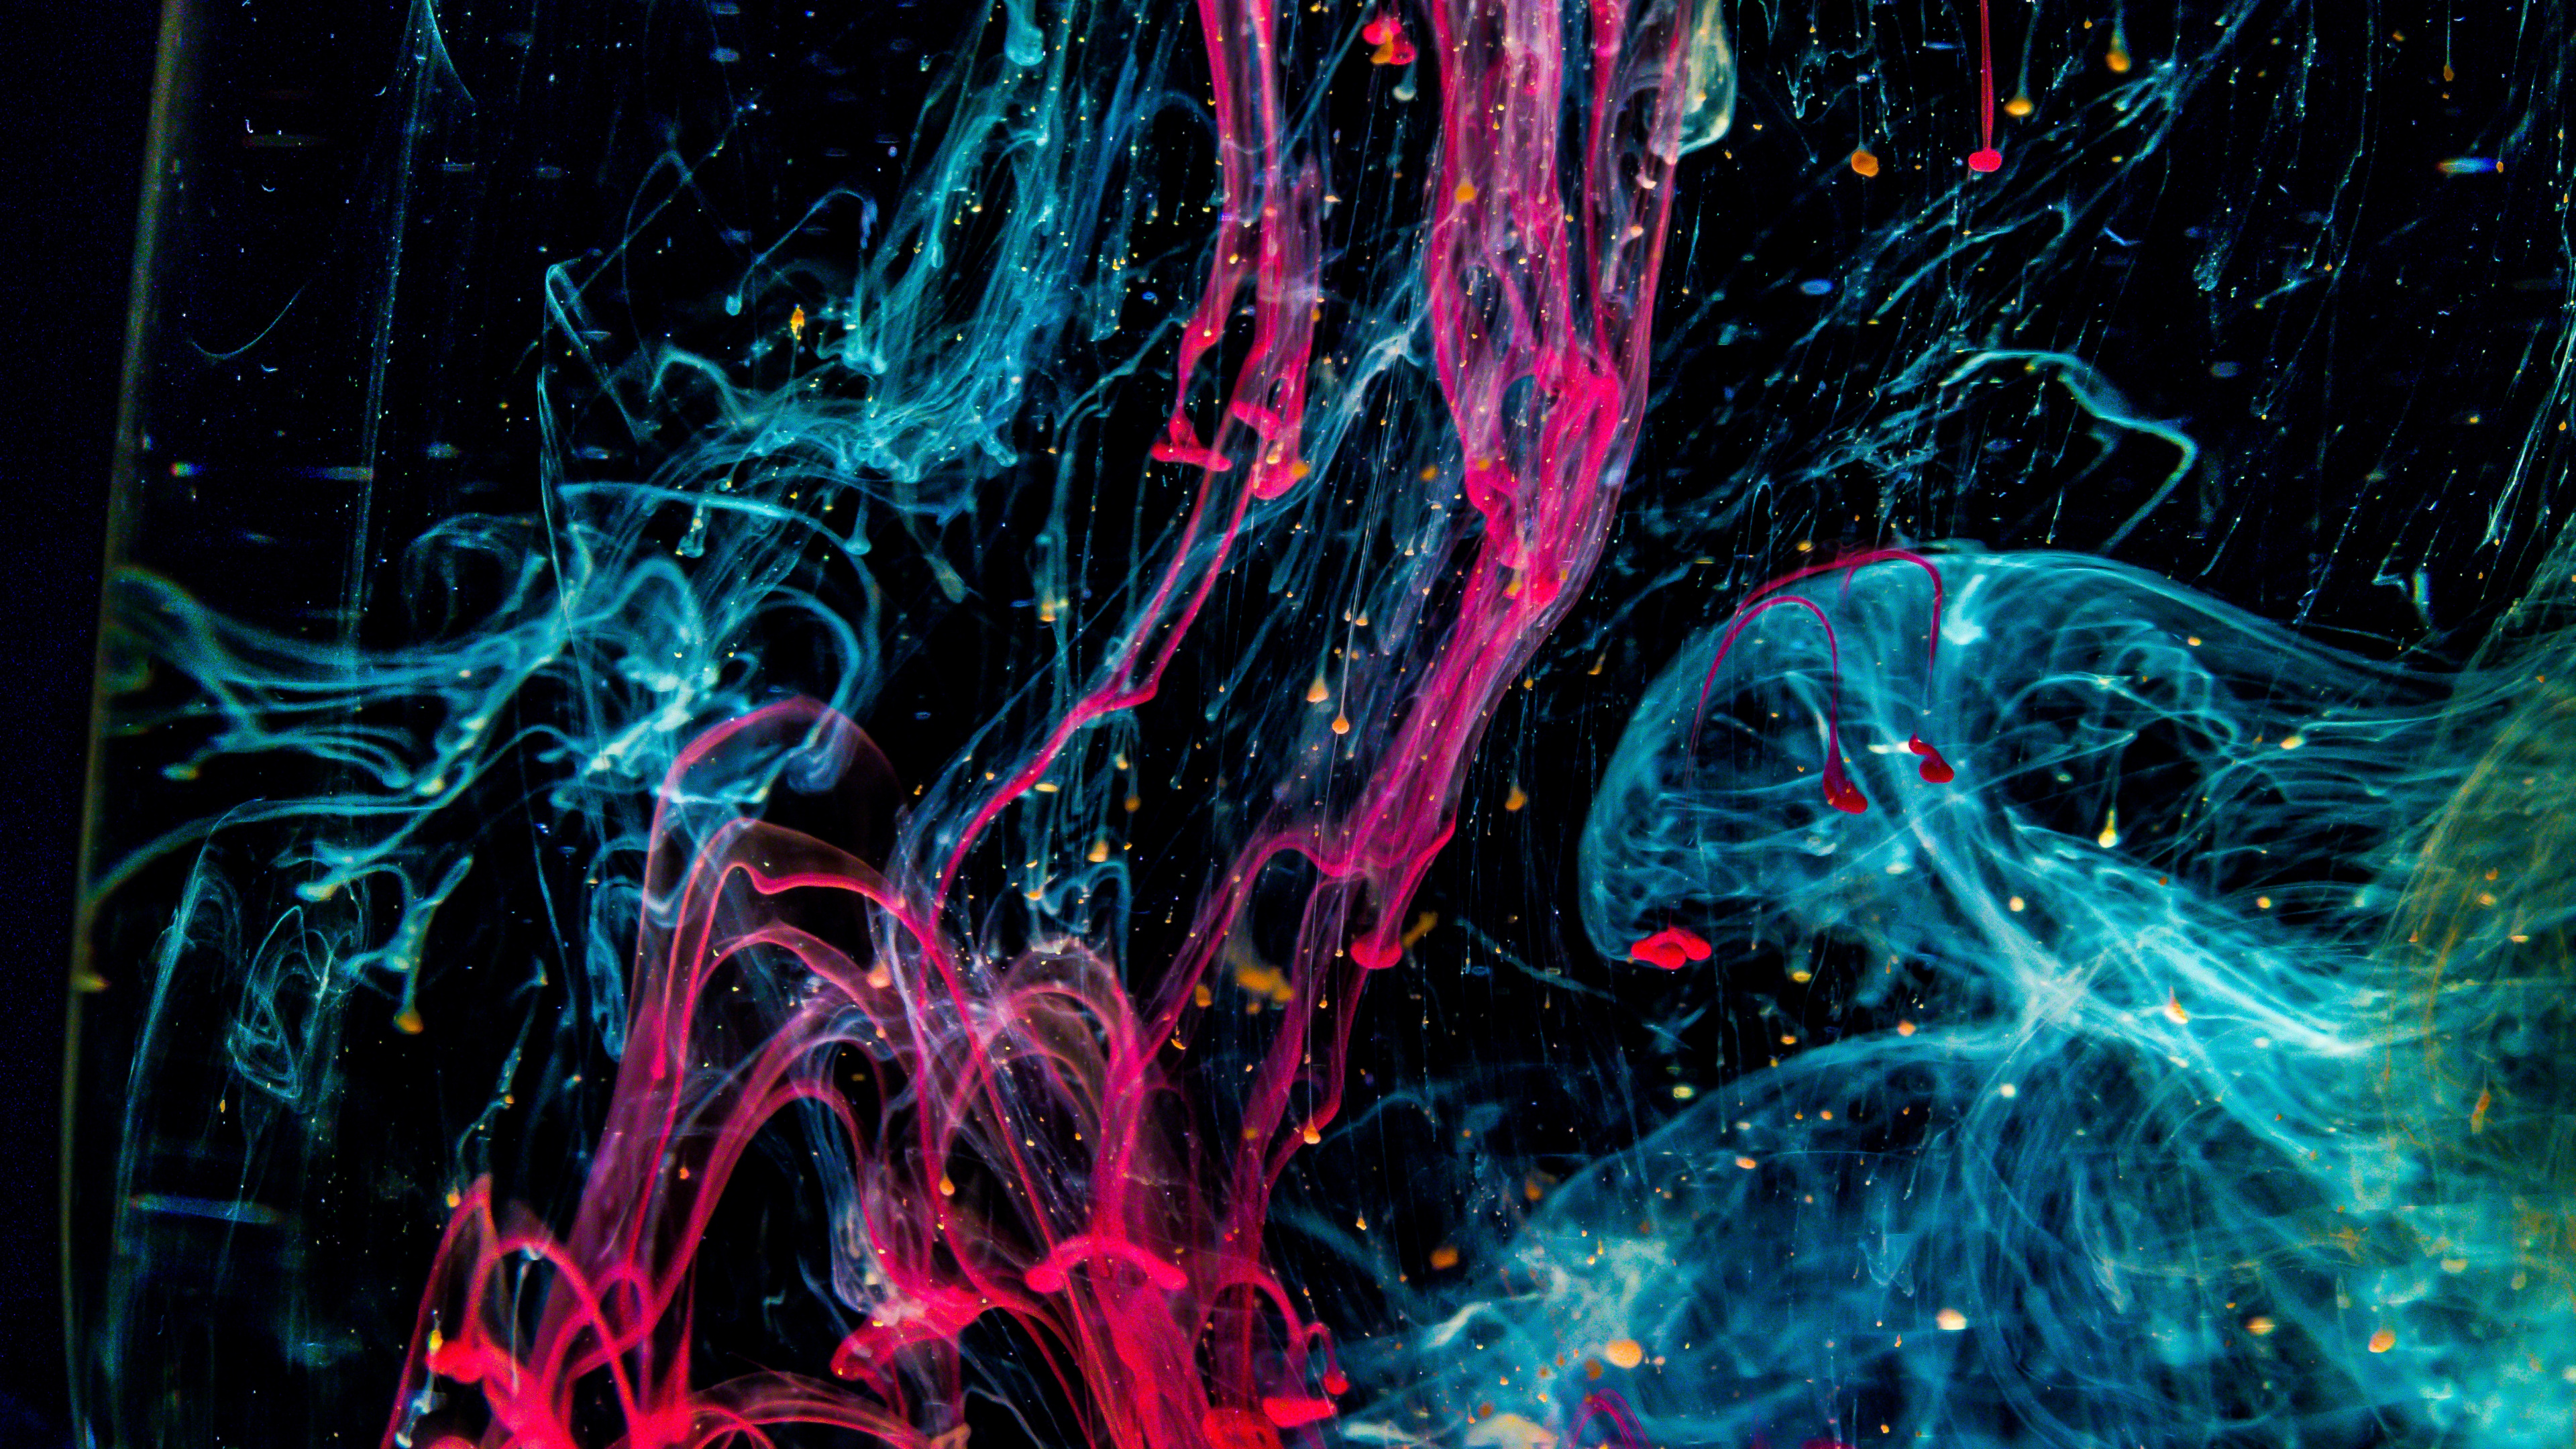 Blue and Red Abstract Painting. Wallpaper in 3840x2160 Resolution